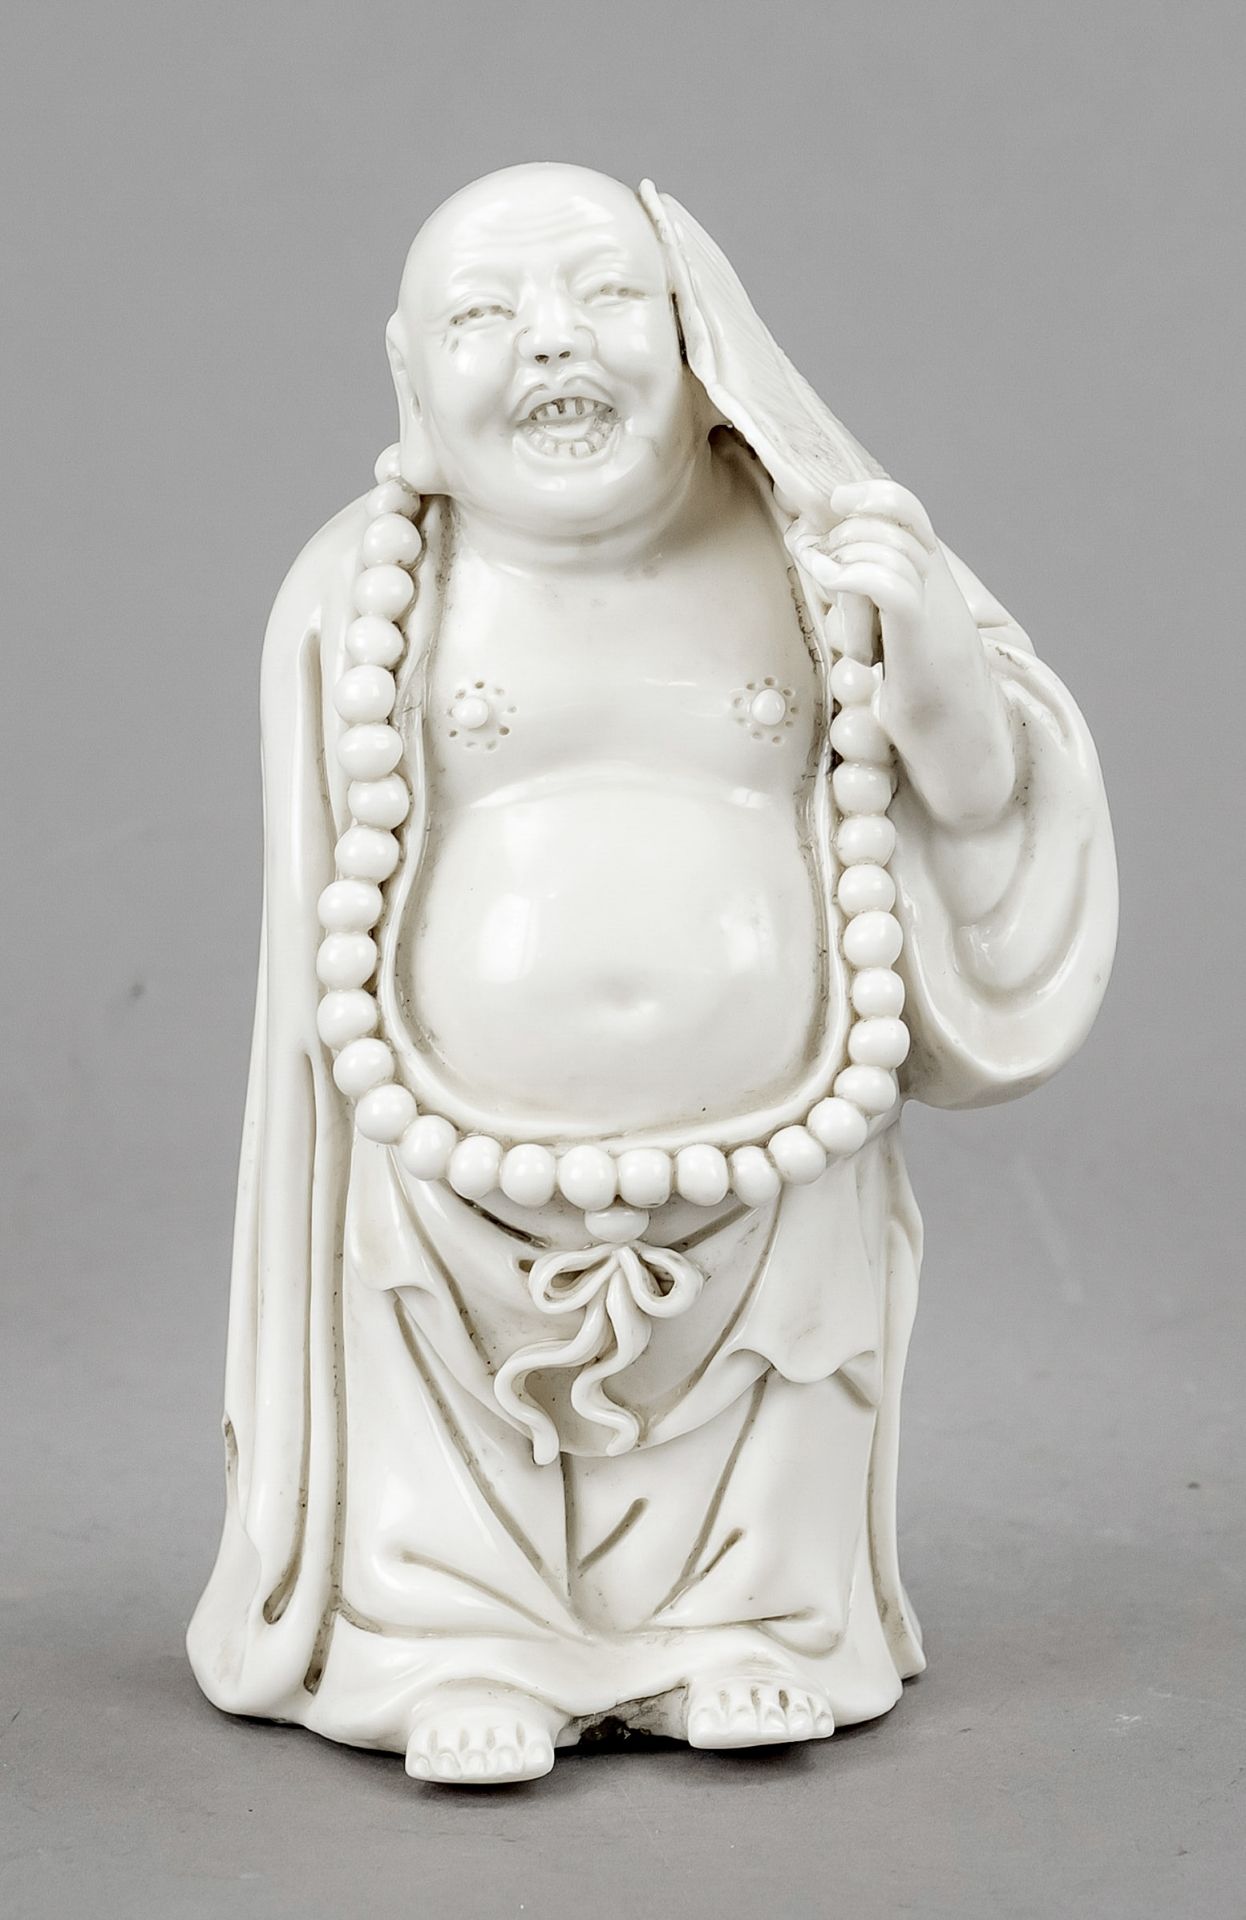 Arhat Angida Blanc de Chine, China, 19th/20th century, Dehua porcelain of the pot-bellied Luohan